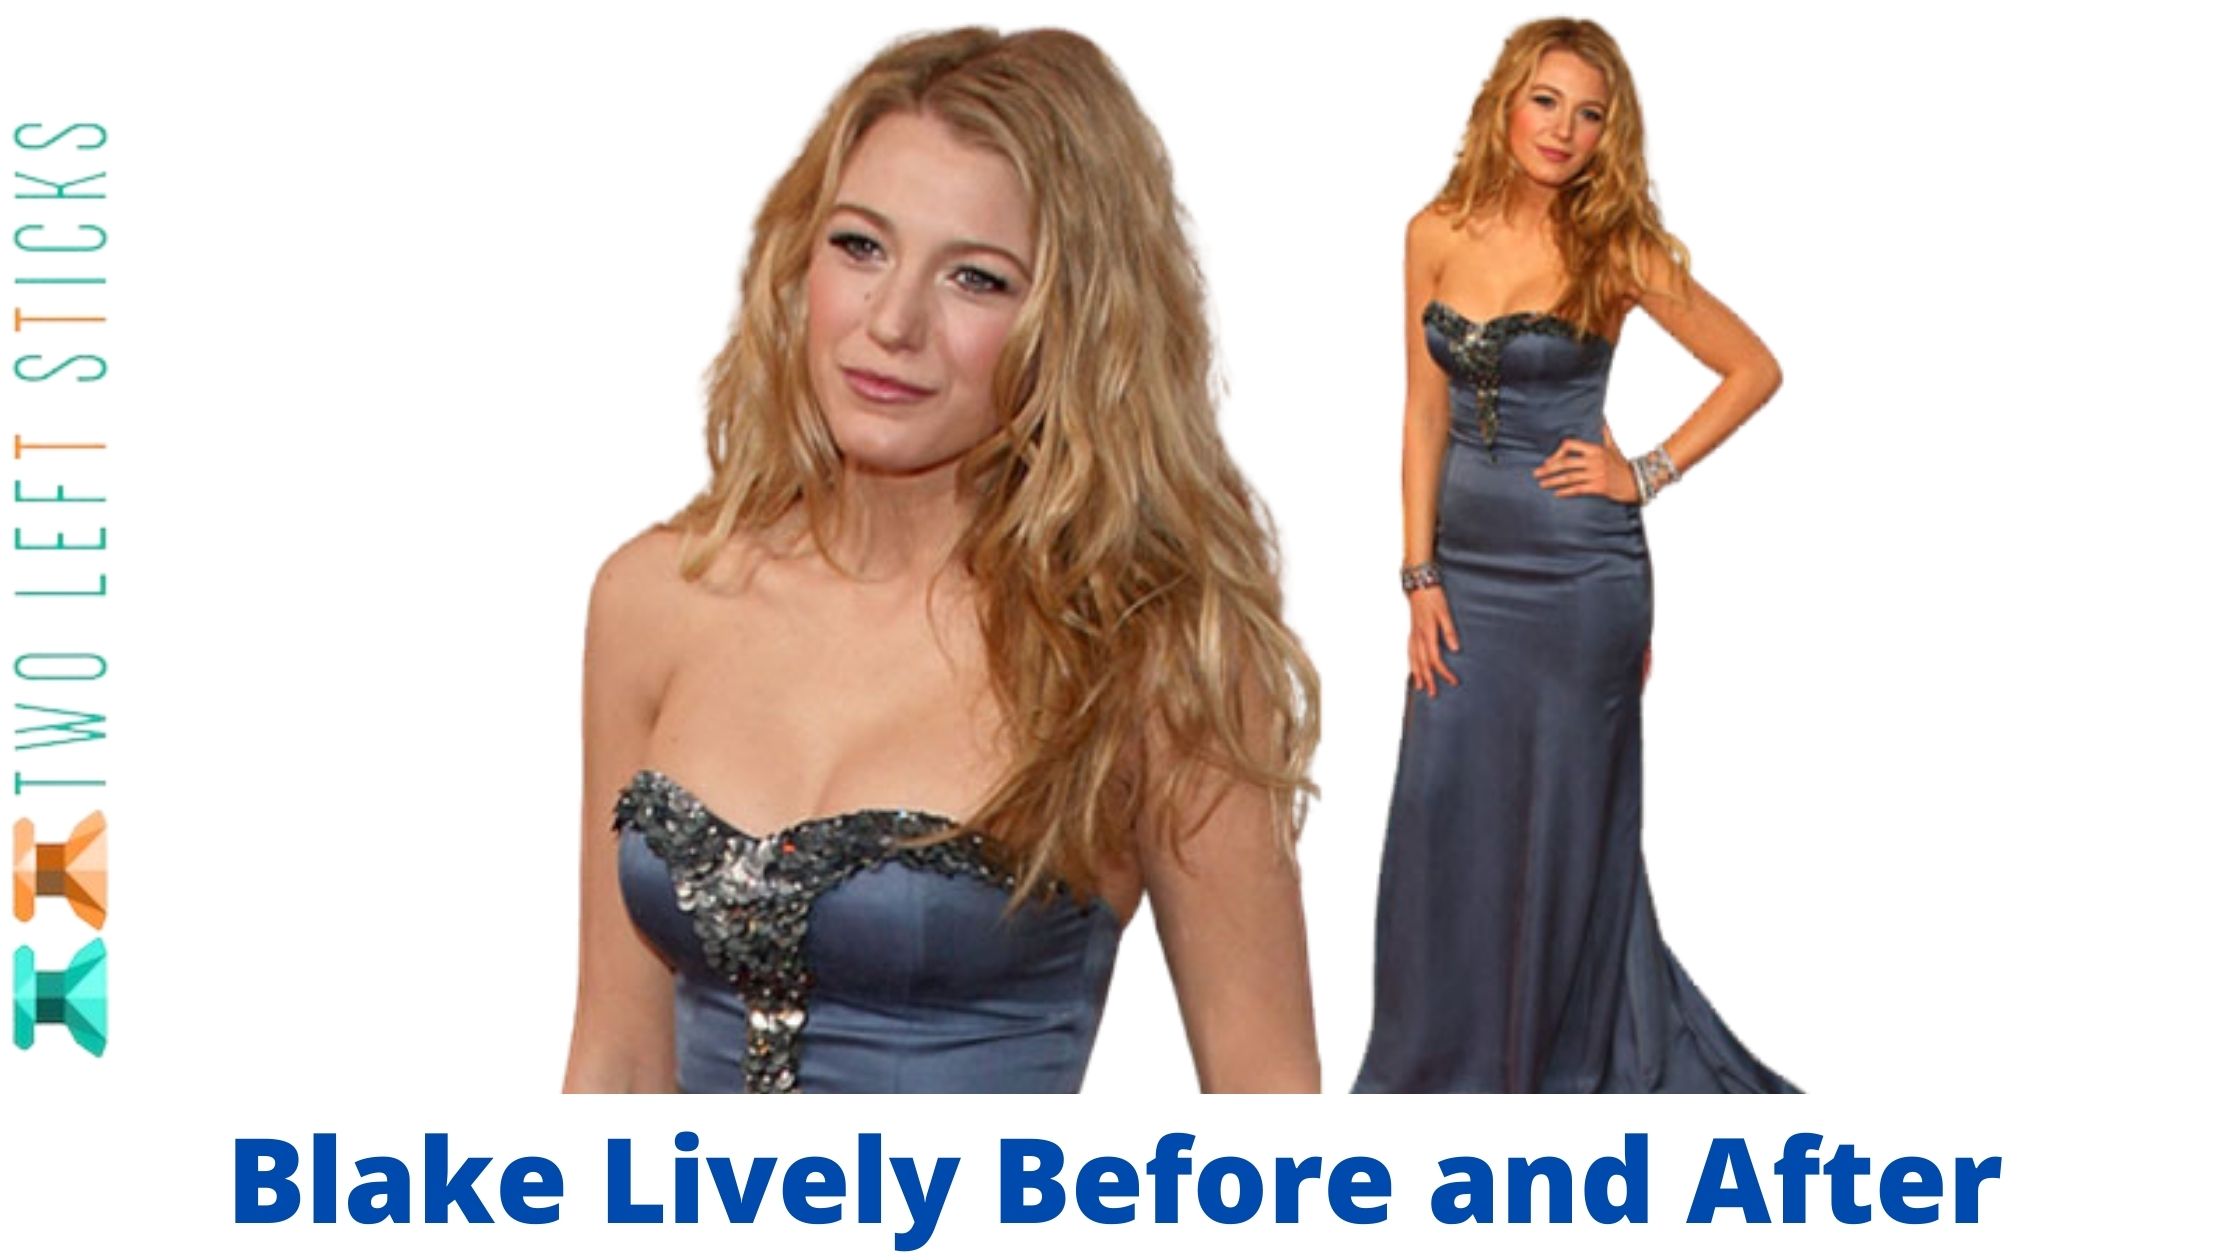 Blake Lively Before and After-twoleftsticks(1)